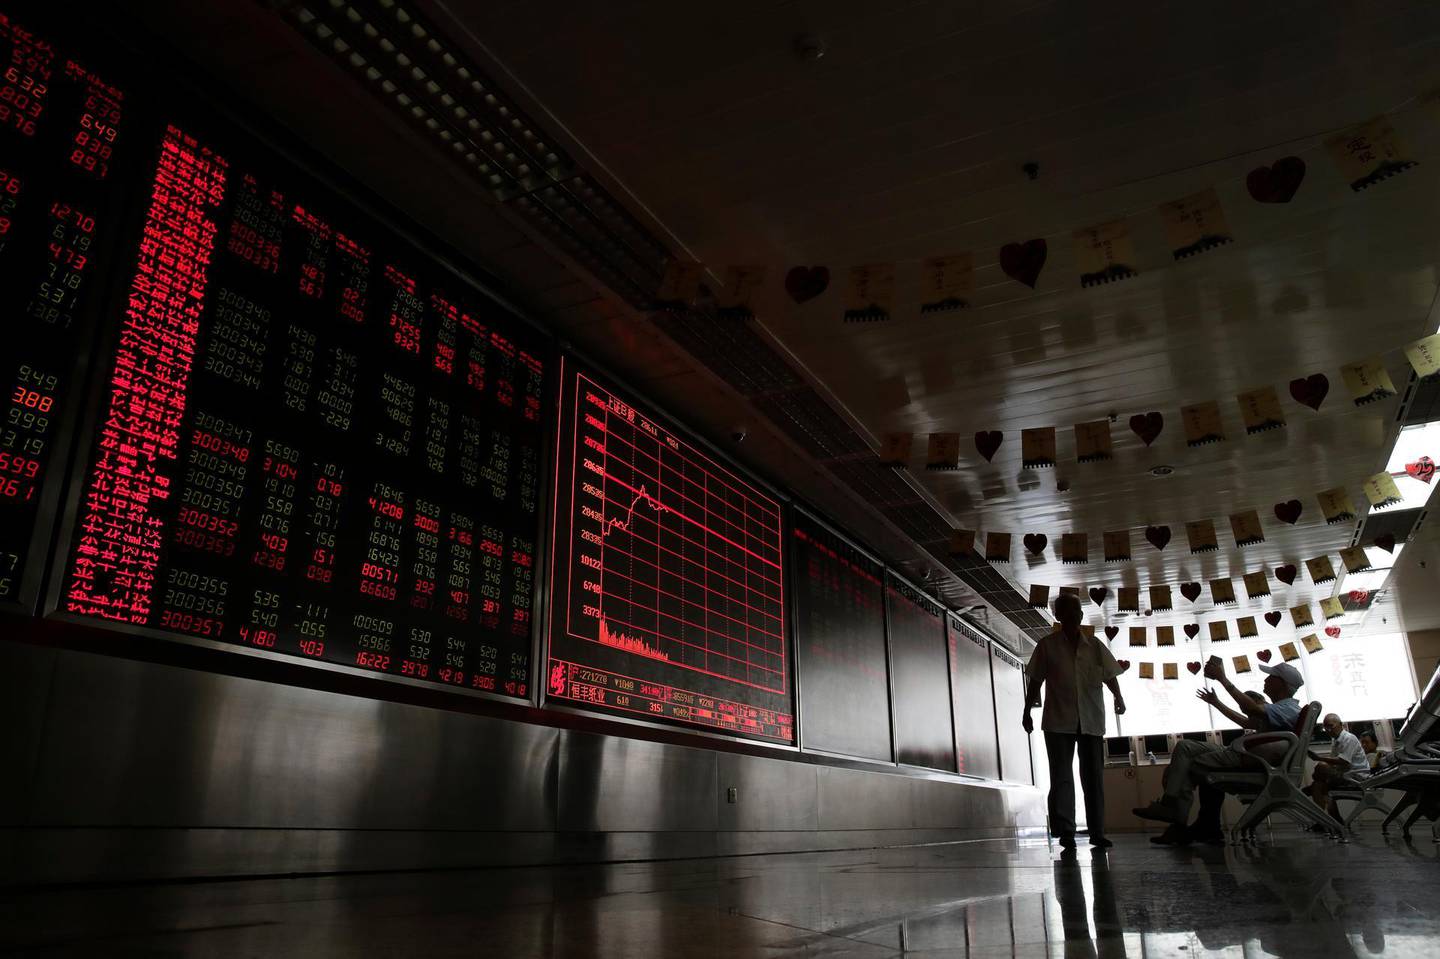 People react as they monitor stock prices at a brokerage house in Beijing, Thursday, Aug. 16, 2018. Asian shares are falling as investors fret over slowing economic growth, especially in China. Technology stocks and oil and metals prices skidded overnight on Wall Street. (AP Photo/Andy Wong)